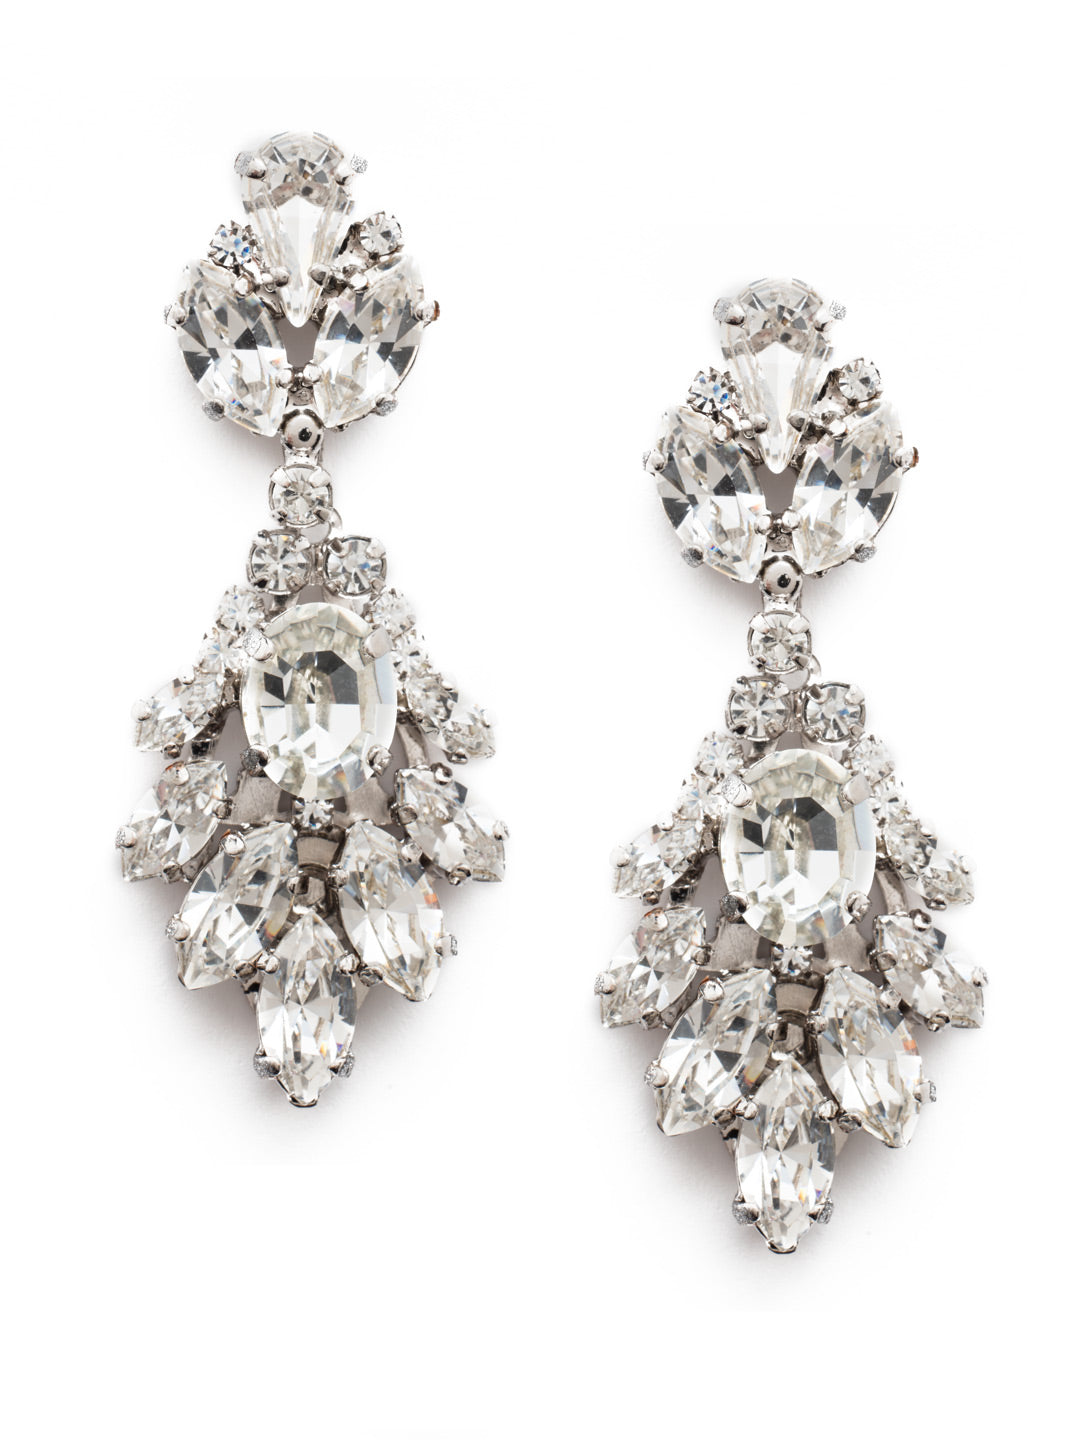 Cascading Crystal Navette Dangle Earrings - EDF29RHCRY - <p>Cascading navette crystals beneath a semi-precious oval stone on these drop earrings create an exquisite look for your special occasions. From Sorrelli's Crystal collection in our Palladium Silver-tone finish.</p>